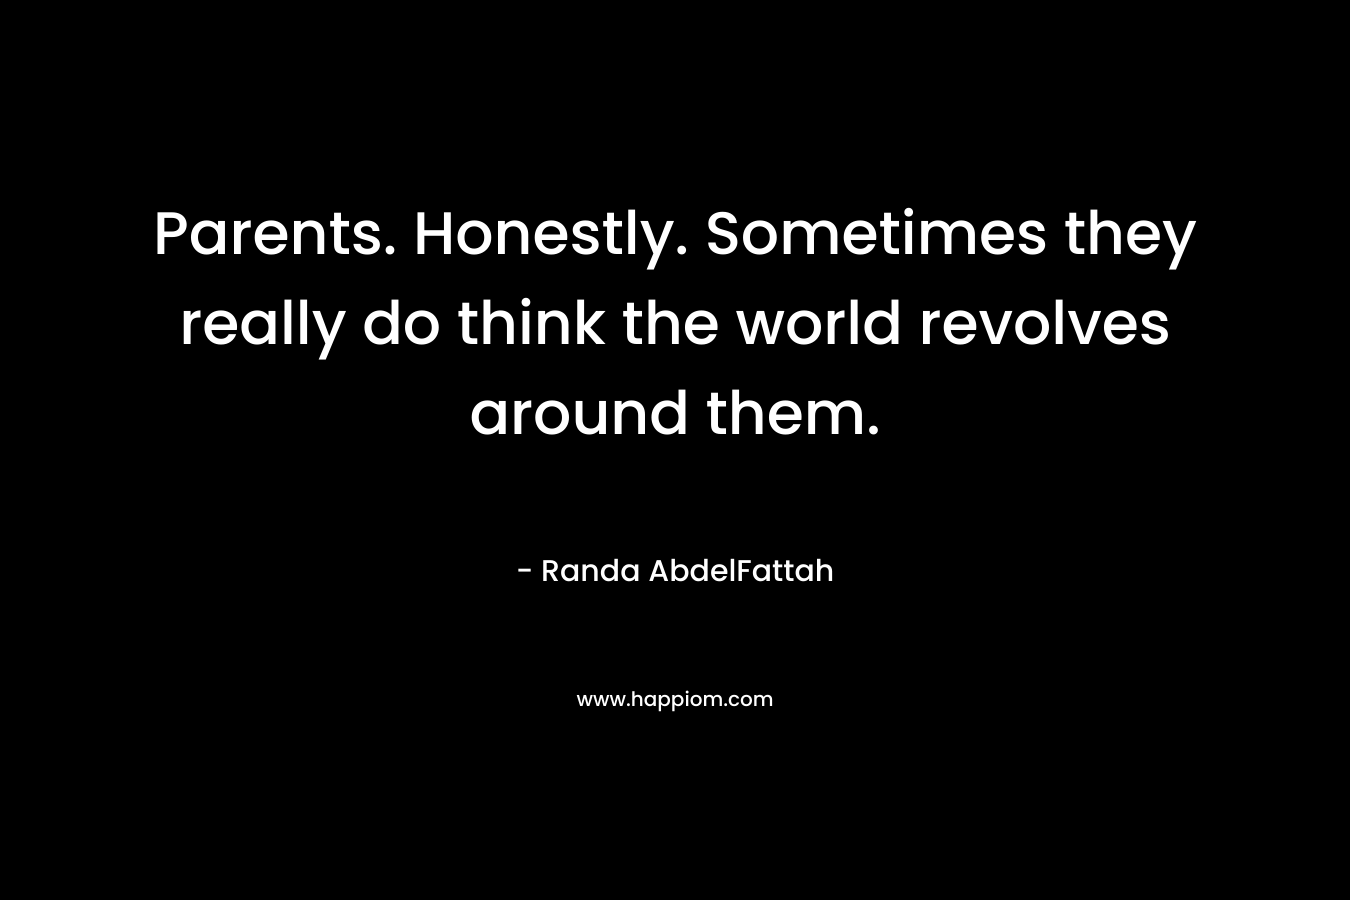 Parents. Honestly. Sometimes they really do think the world revolves around them.